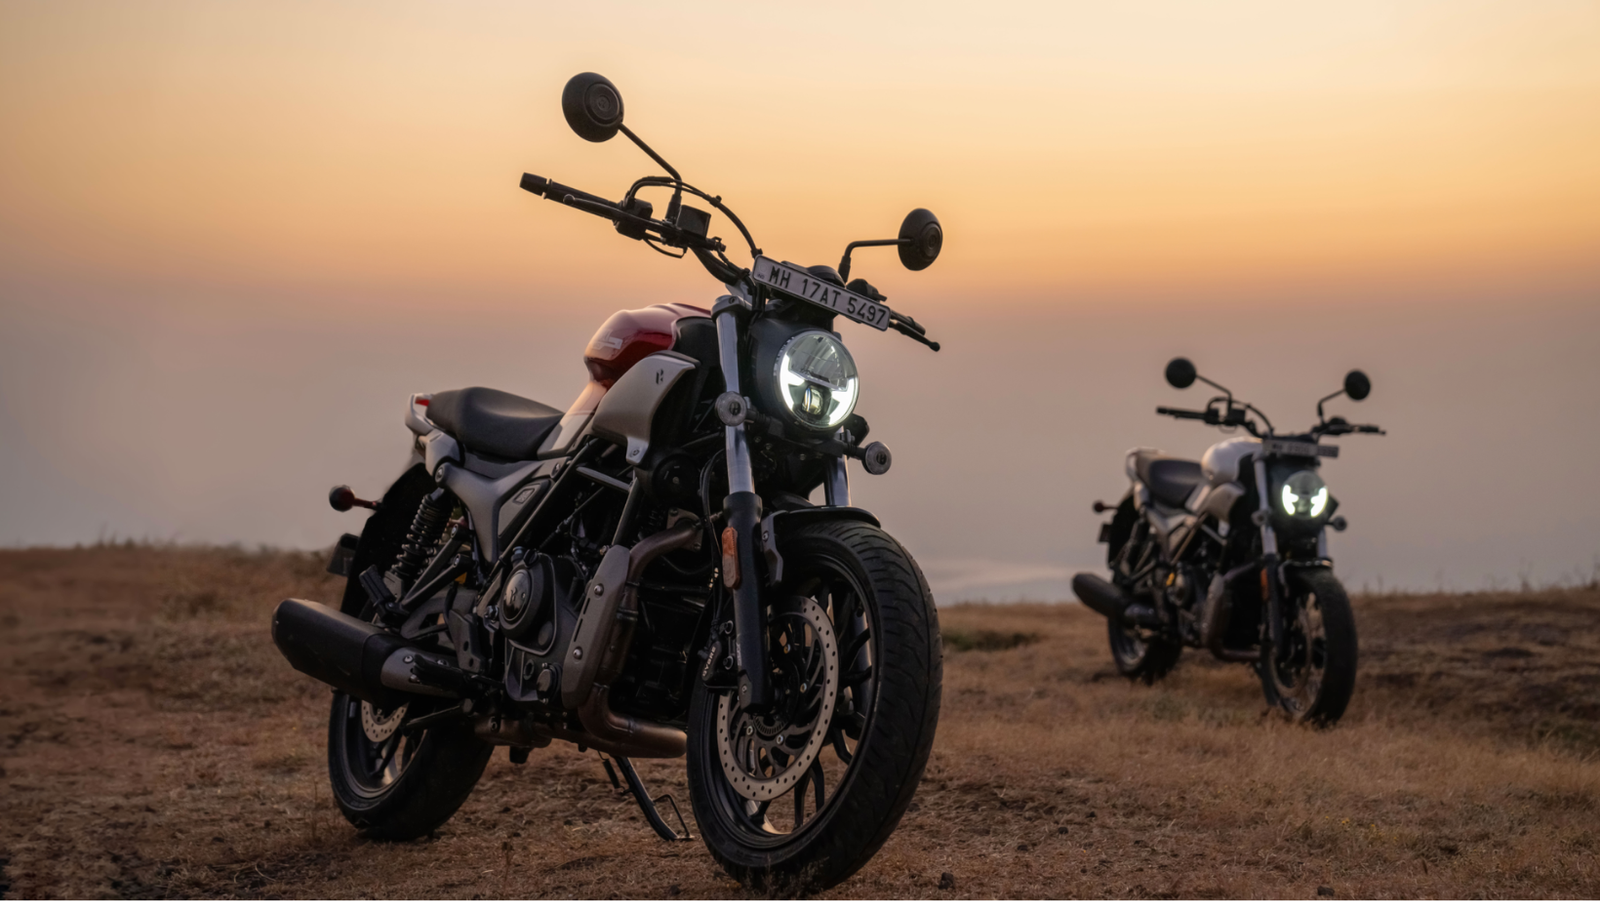 Hero MotoCorp has officially launched India's most premium two-wheeler, the Maverick 440.